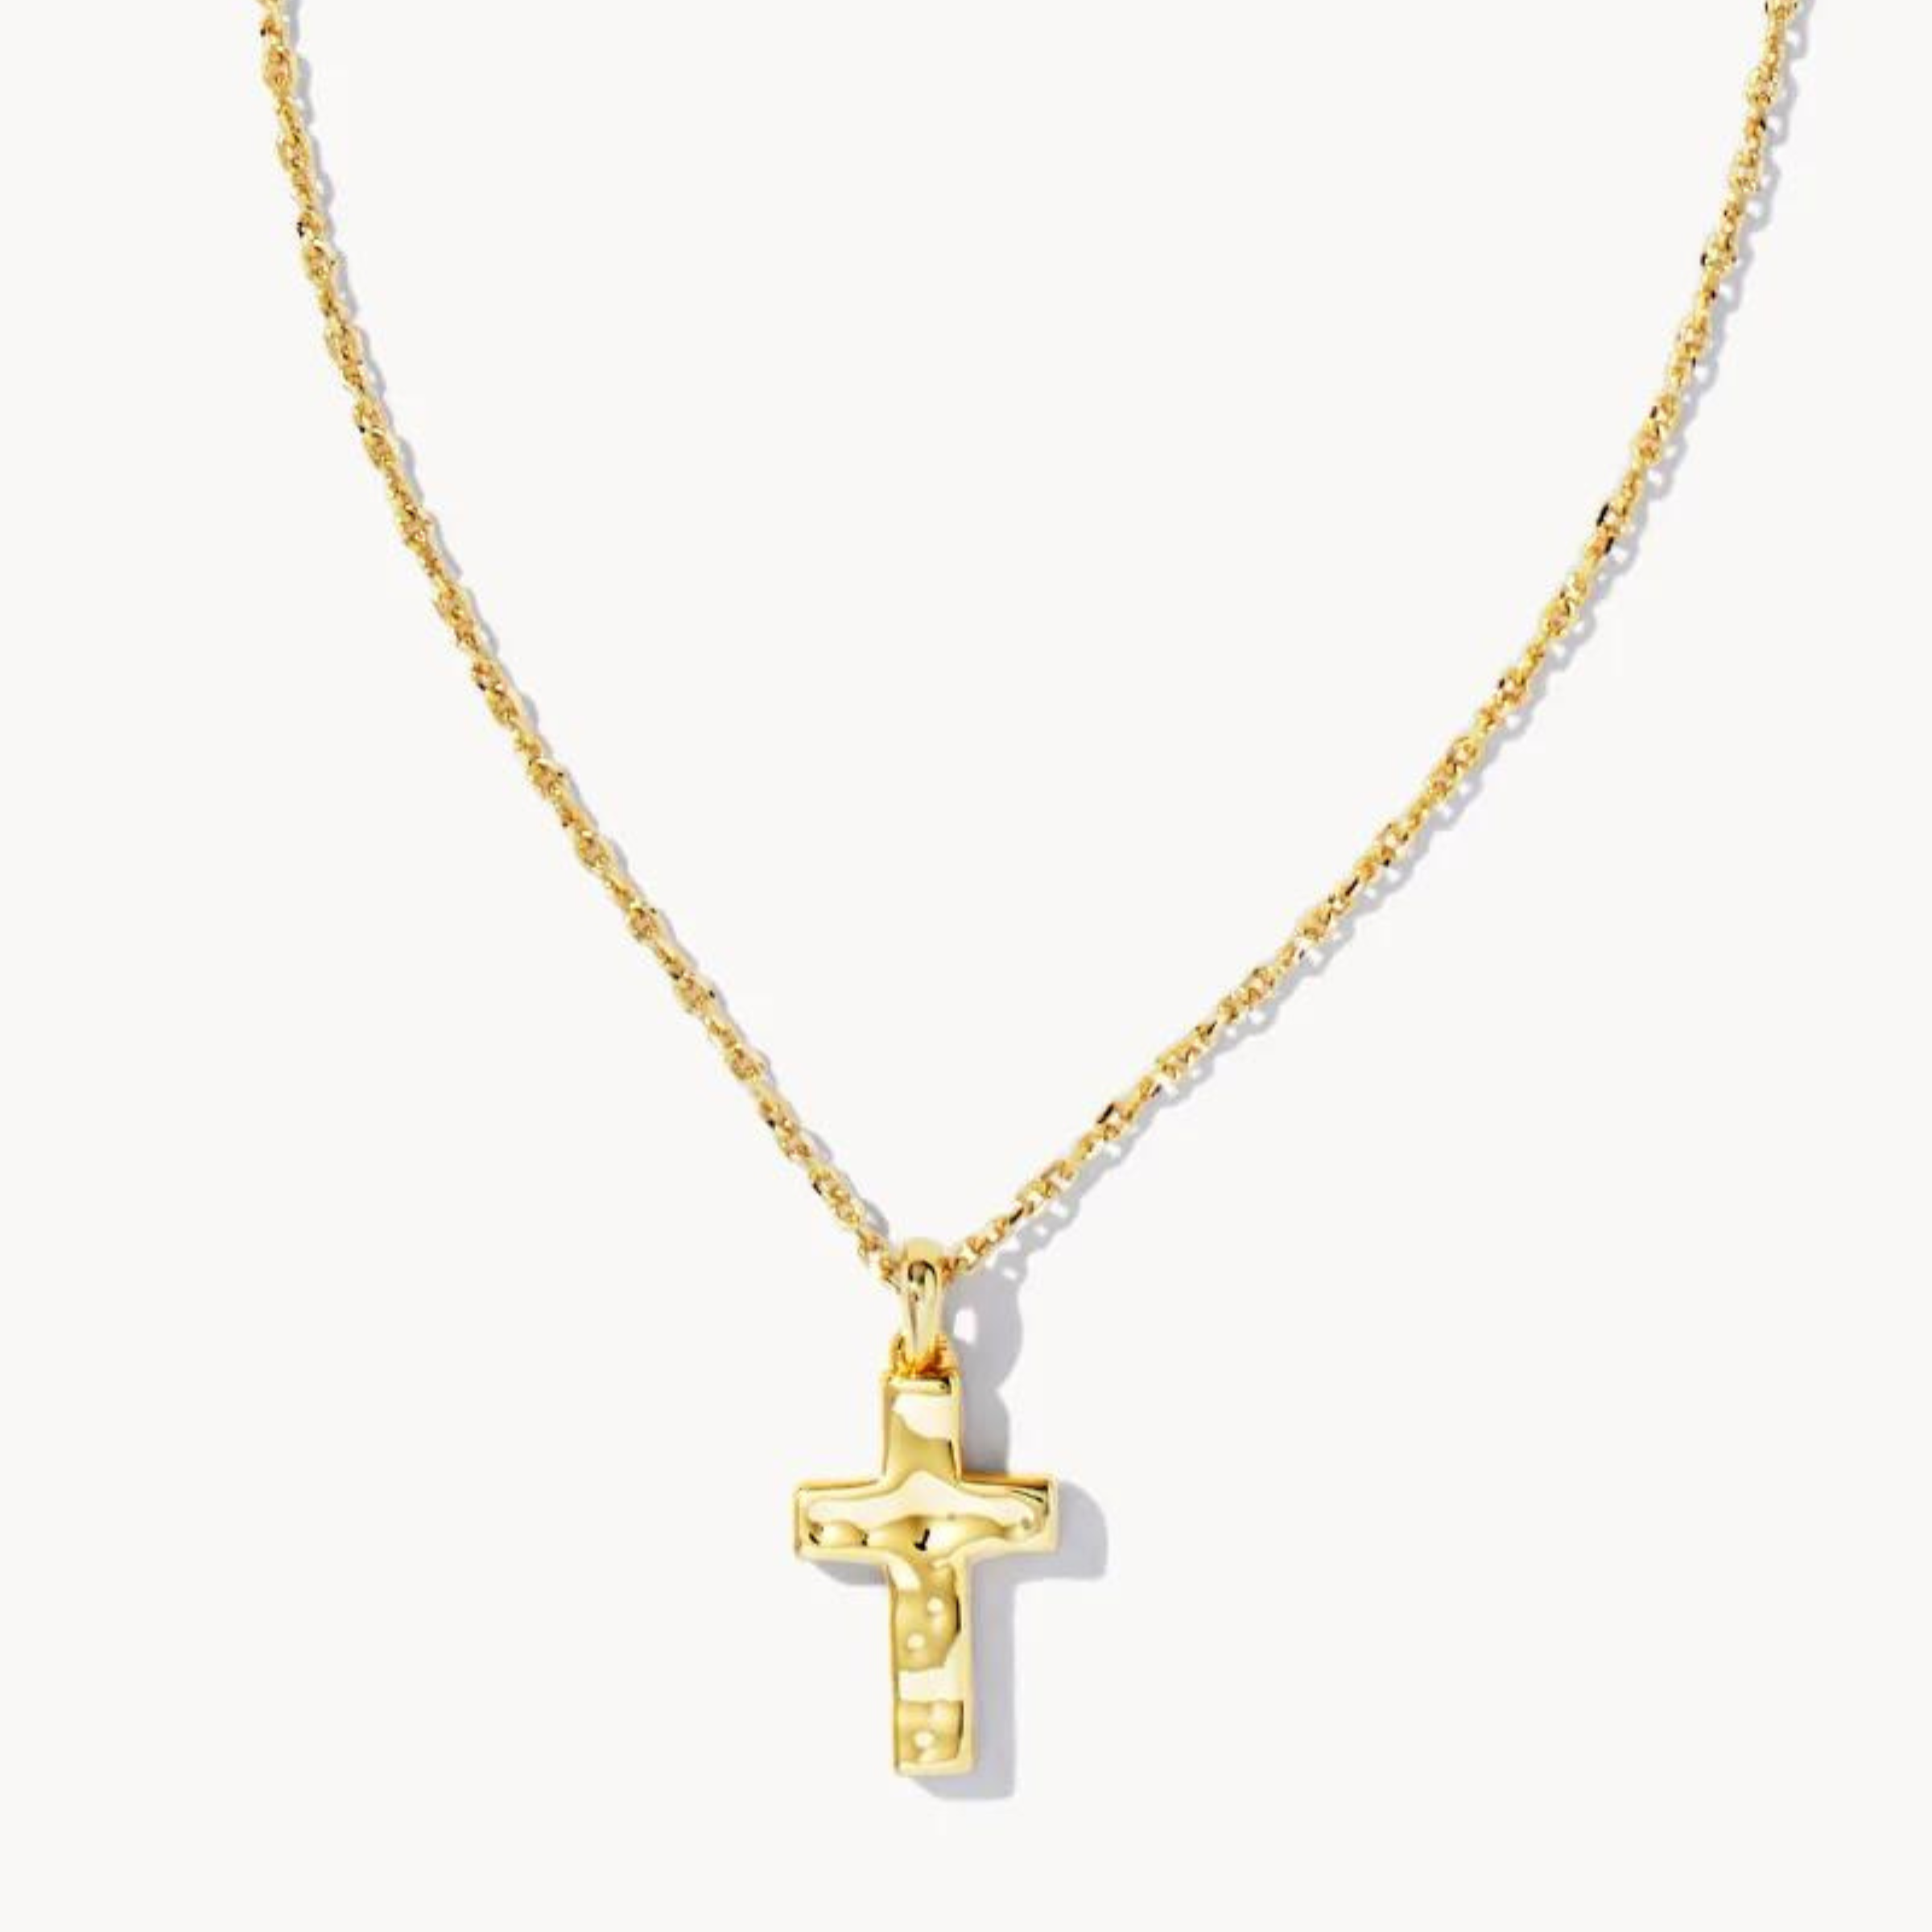 Kendra Scott | Cross Pendant Necklace in Gold - Giddy Up Glamour Boutique